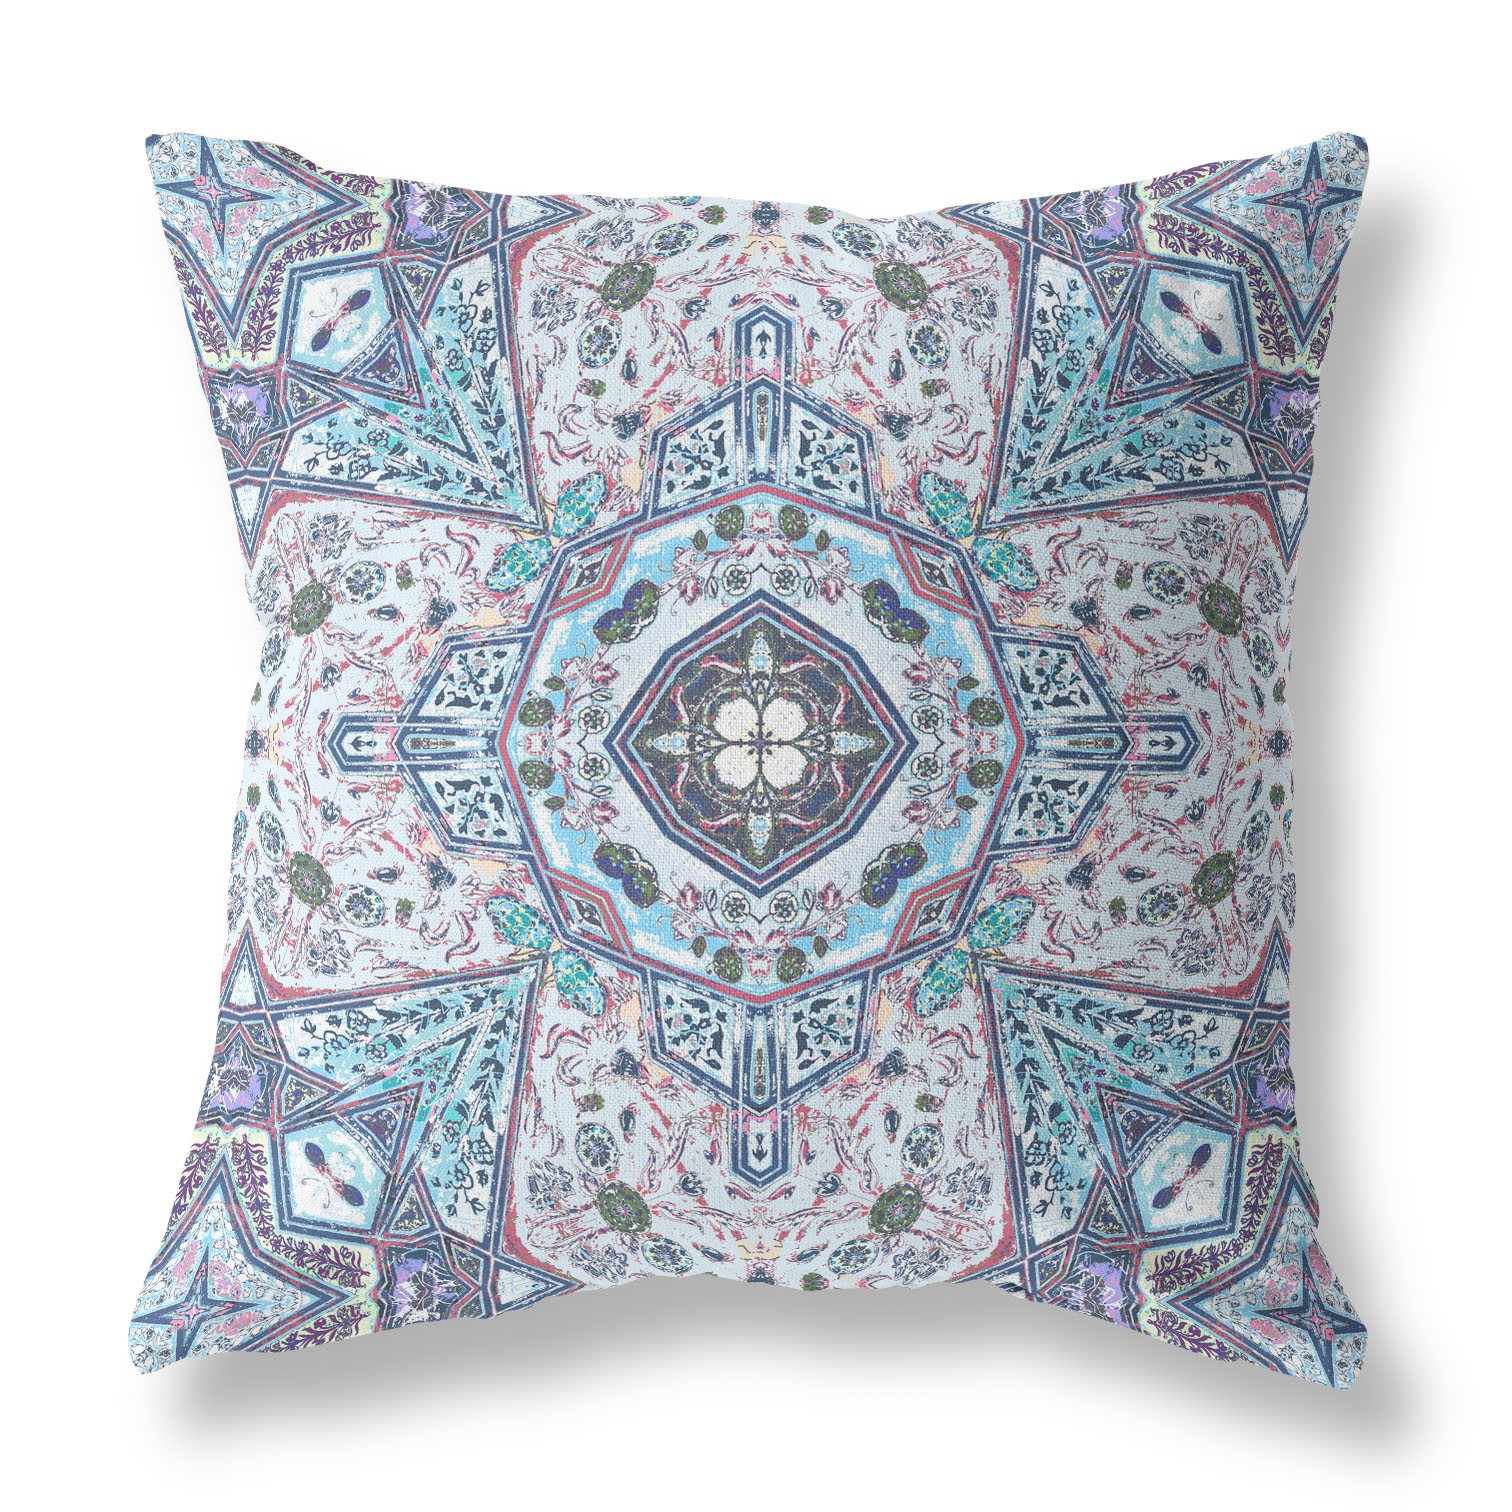 26" X 26" Blue And Gray Blown Seam Geometric Indoor Outdoor Throw Pillow Cover & Insert-418015-1